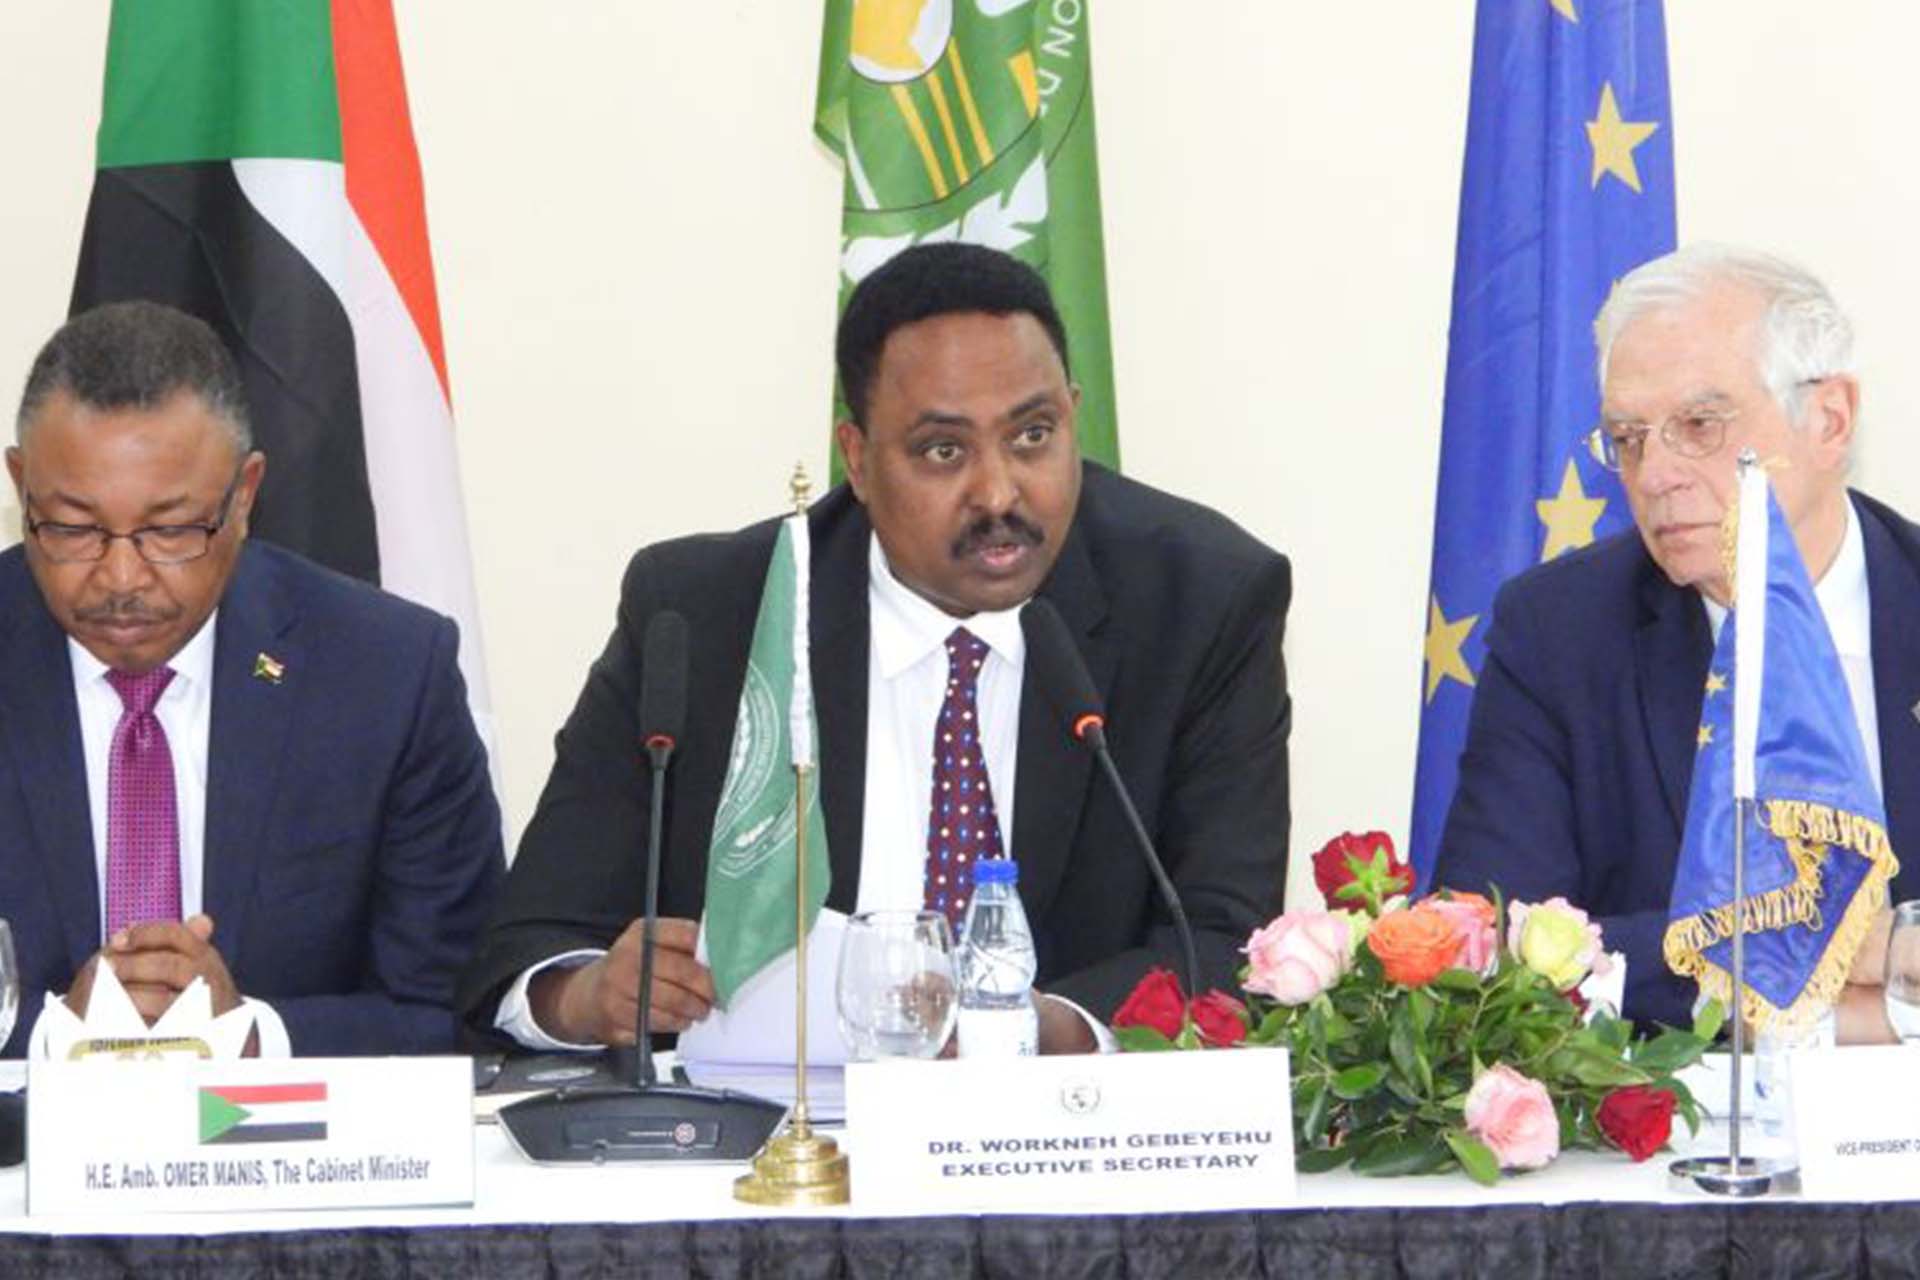 JOINT PRESS RELEASE – IGAD-EU MINISTERIAL MEETING